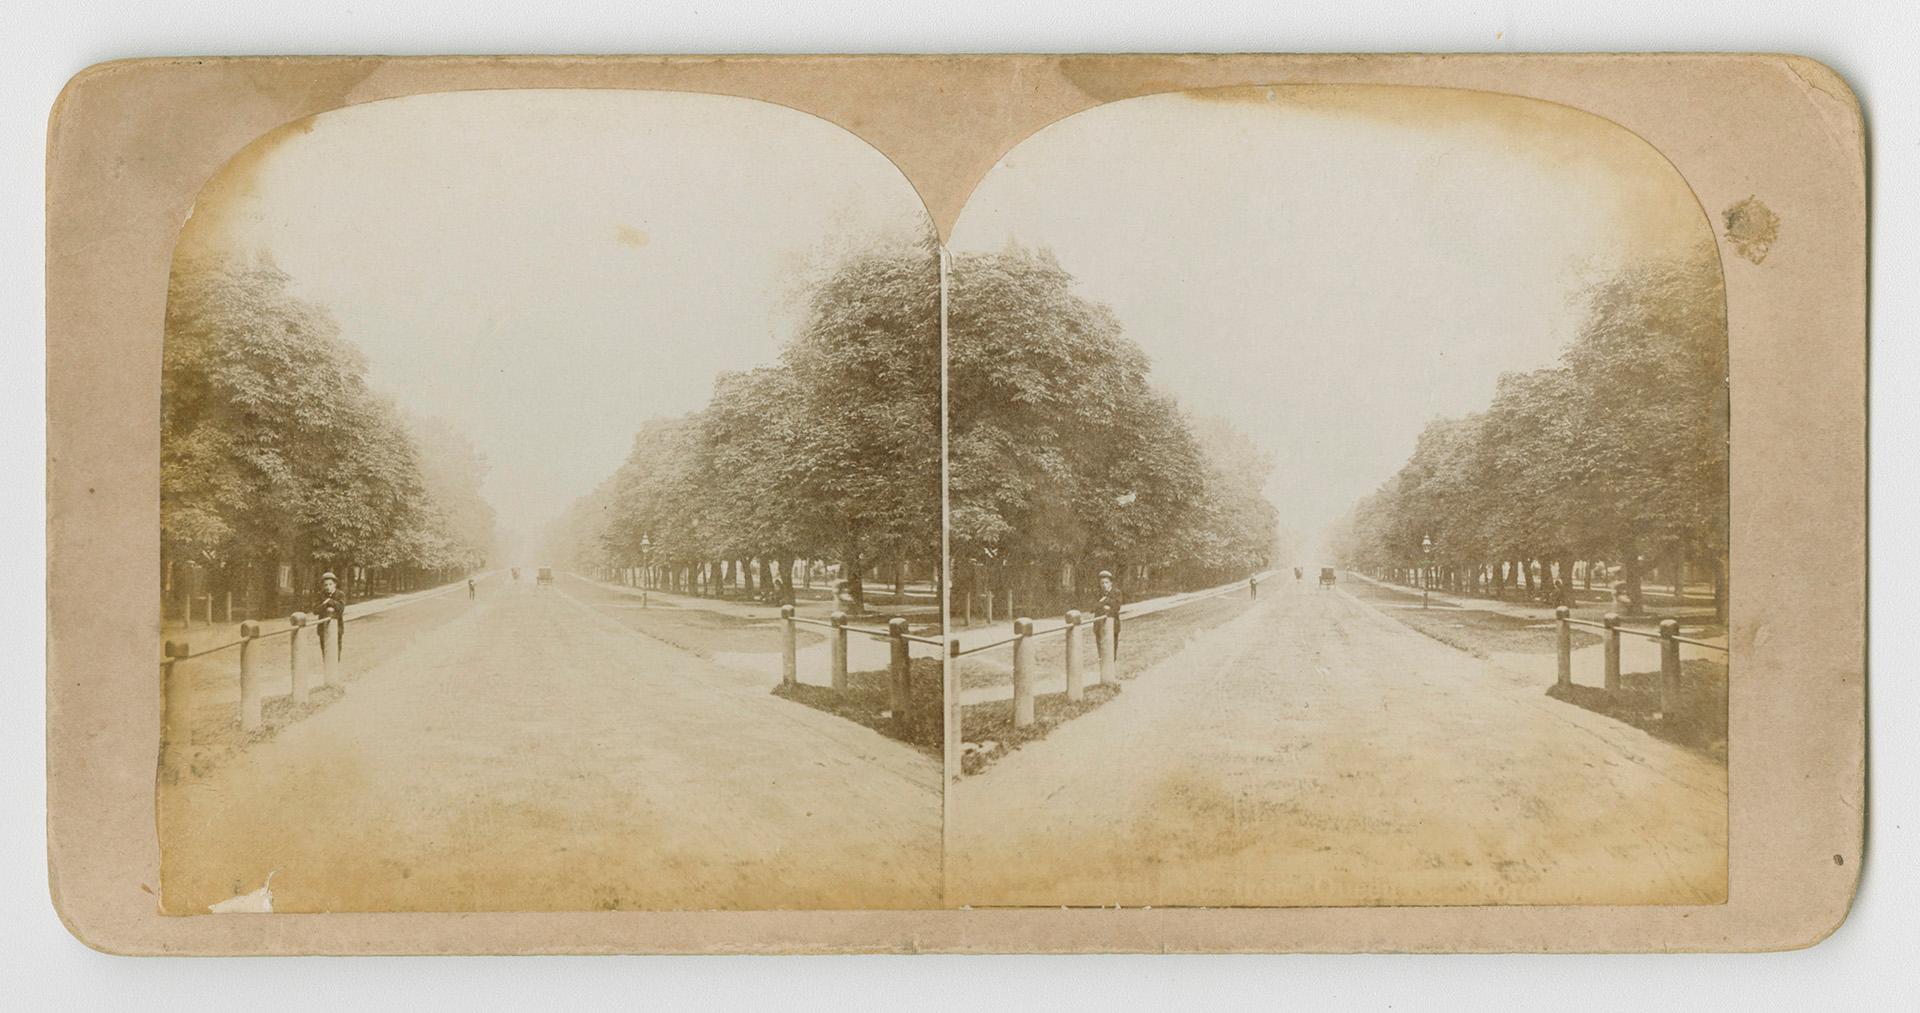 Pictures show a road lined with trees with a gate in front of it.